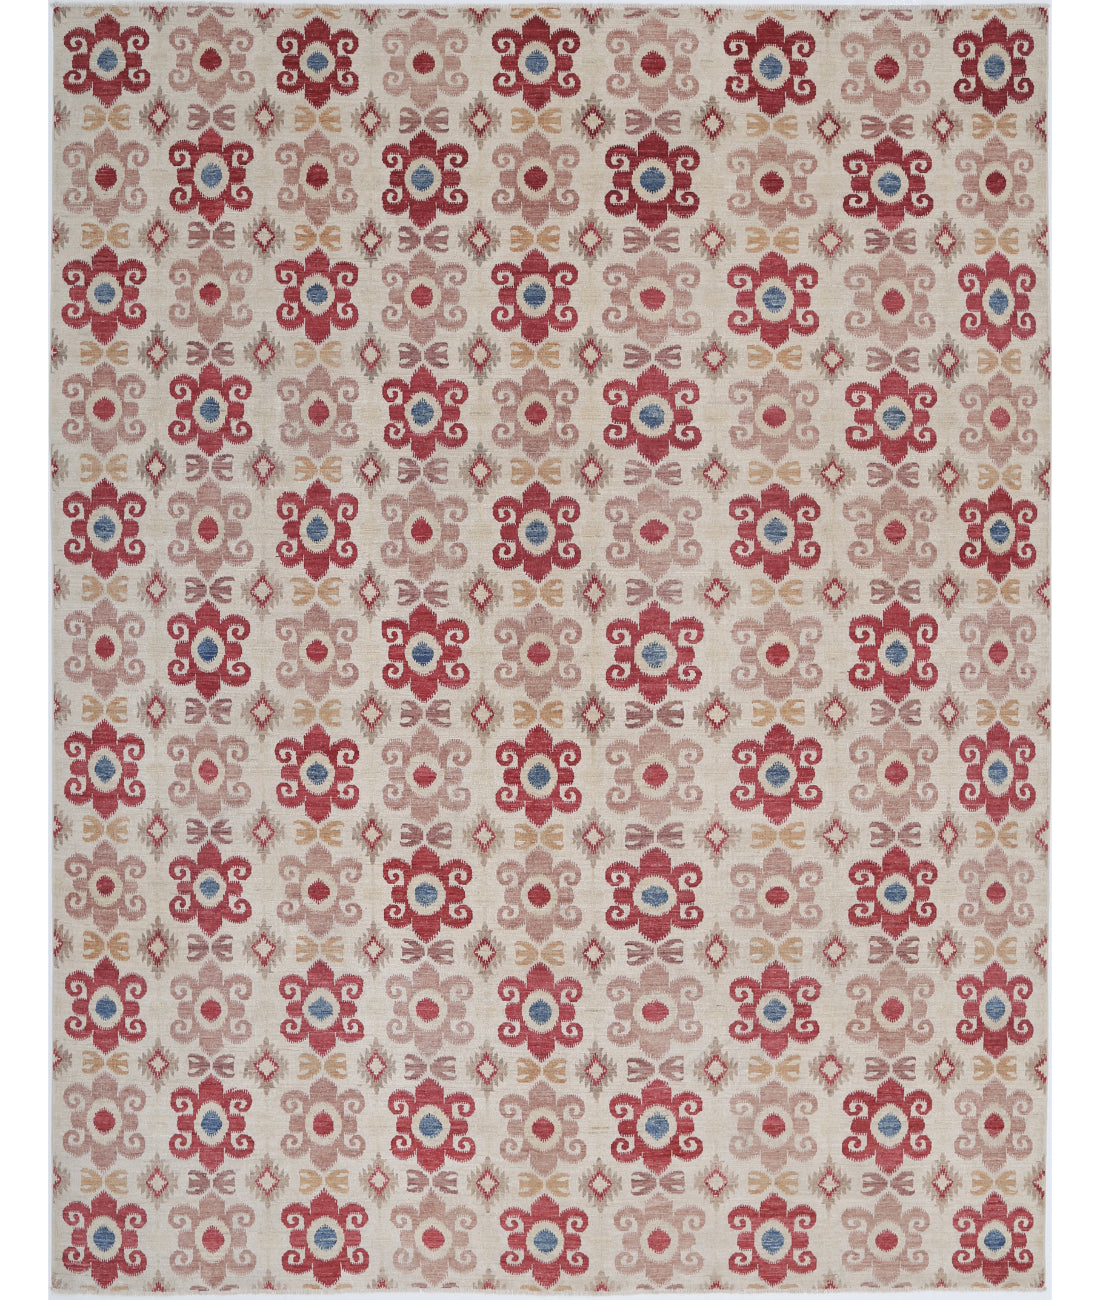 Hand Knotted Ikat Wool Rug - 8&#39;9&#39;&#39; x 11&#39;3&#39;&#39; 8&#39;9&#39;&#39; x 11&#39;3&#39;&#39; (263 X 338) / Ivory / Red